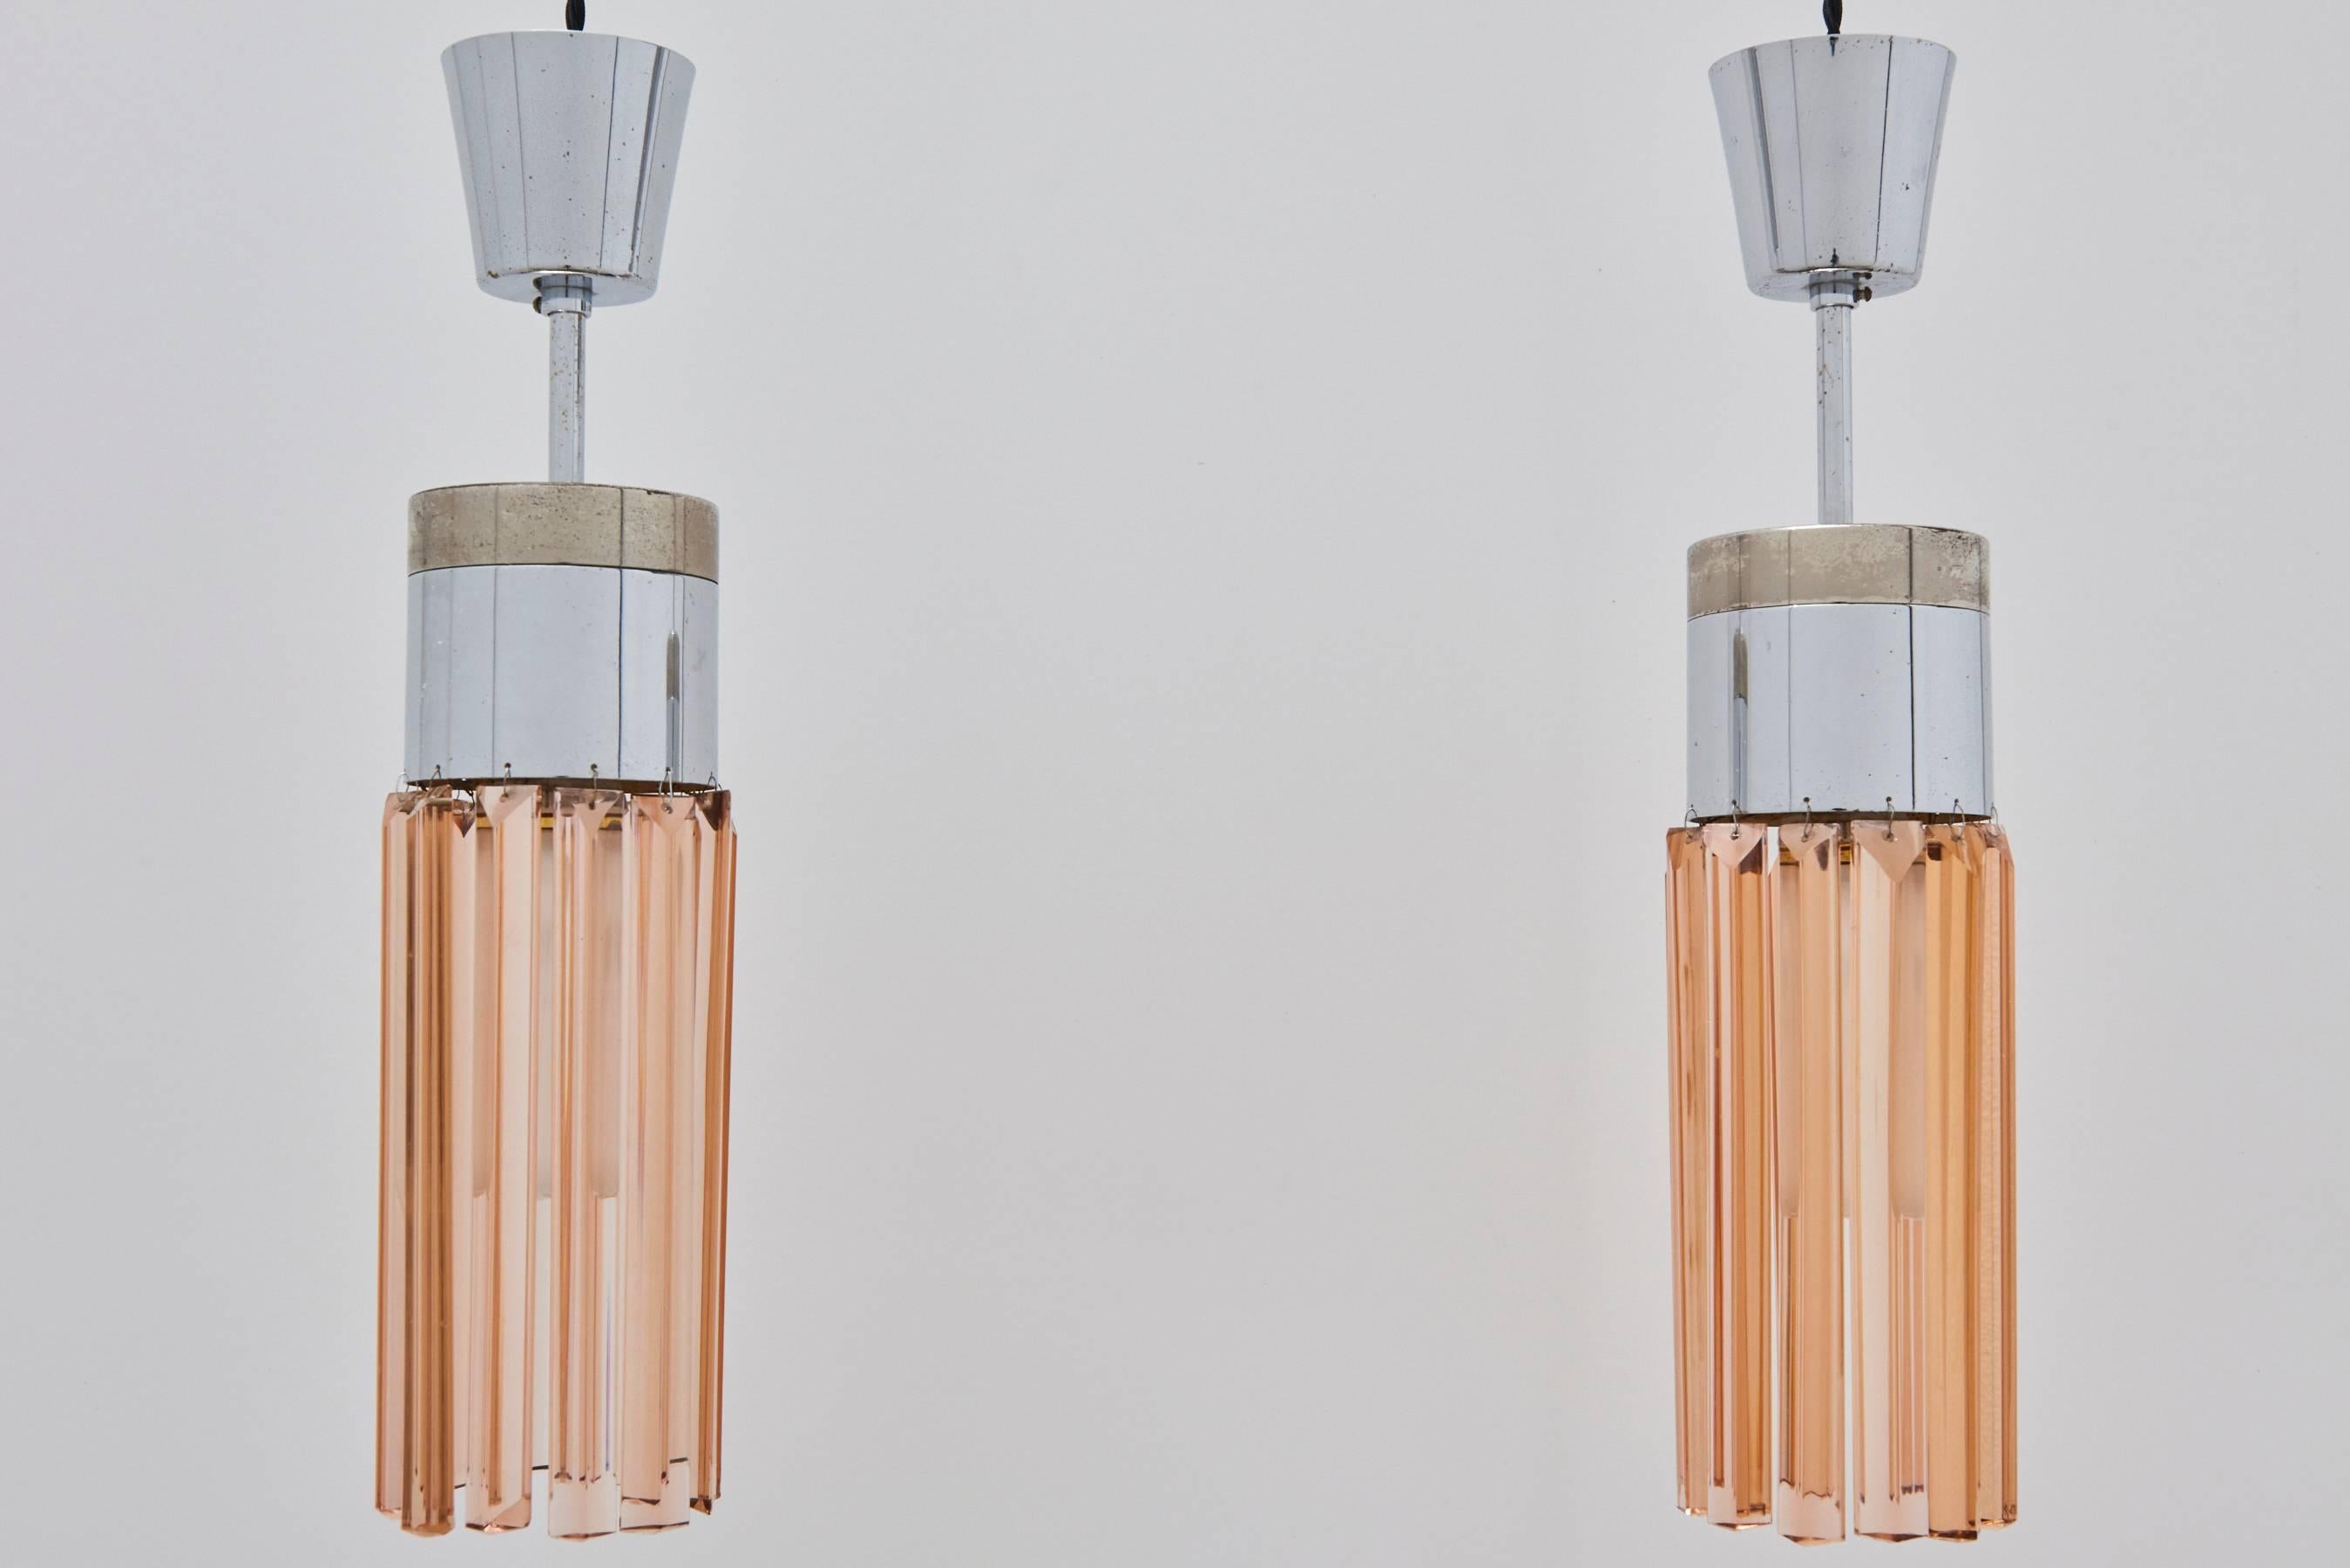 Vintage Pair of Peach Crystal Pendant Lamps, Model No. 1327 by Stilnovo, 1960s. Pair of delicate pendant lamps with chrome-plated metal fittings and long peach-colored faceted glass crystal prisms. One lamp retains original Stilnovo sticker.